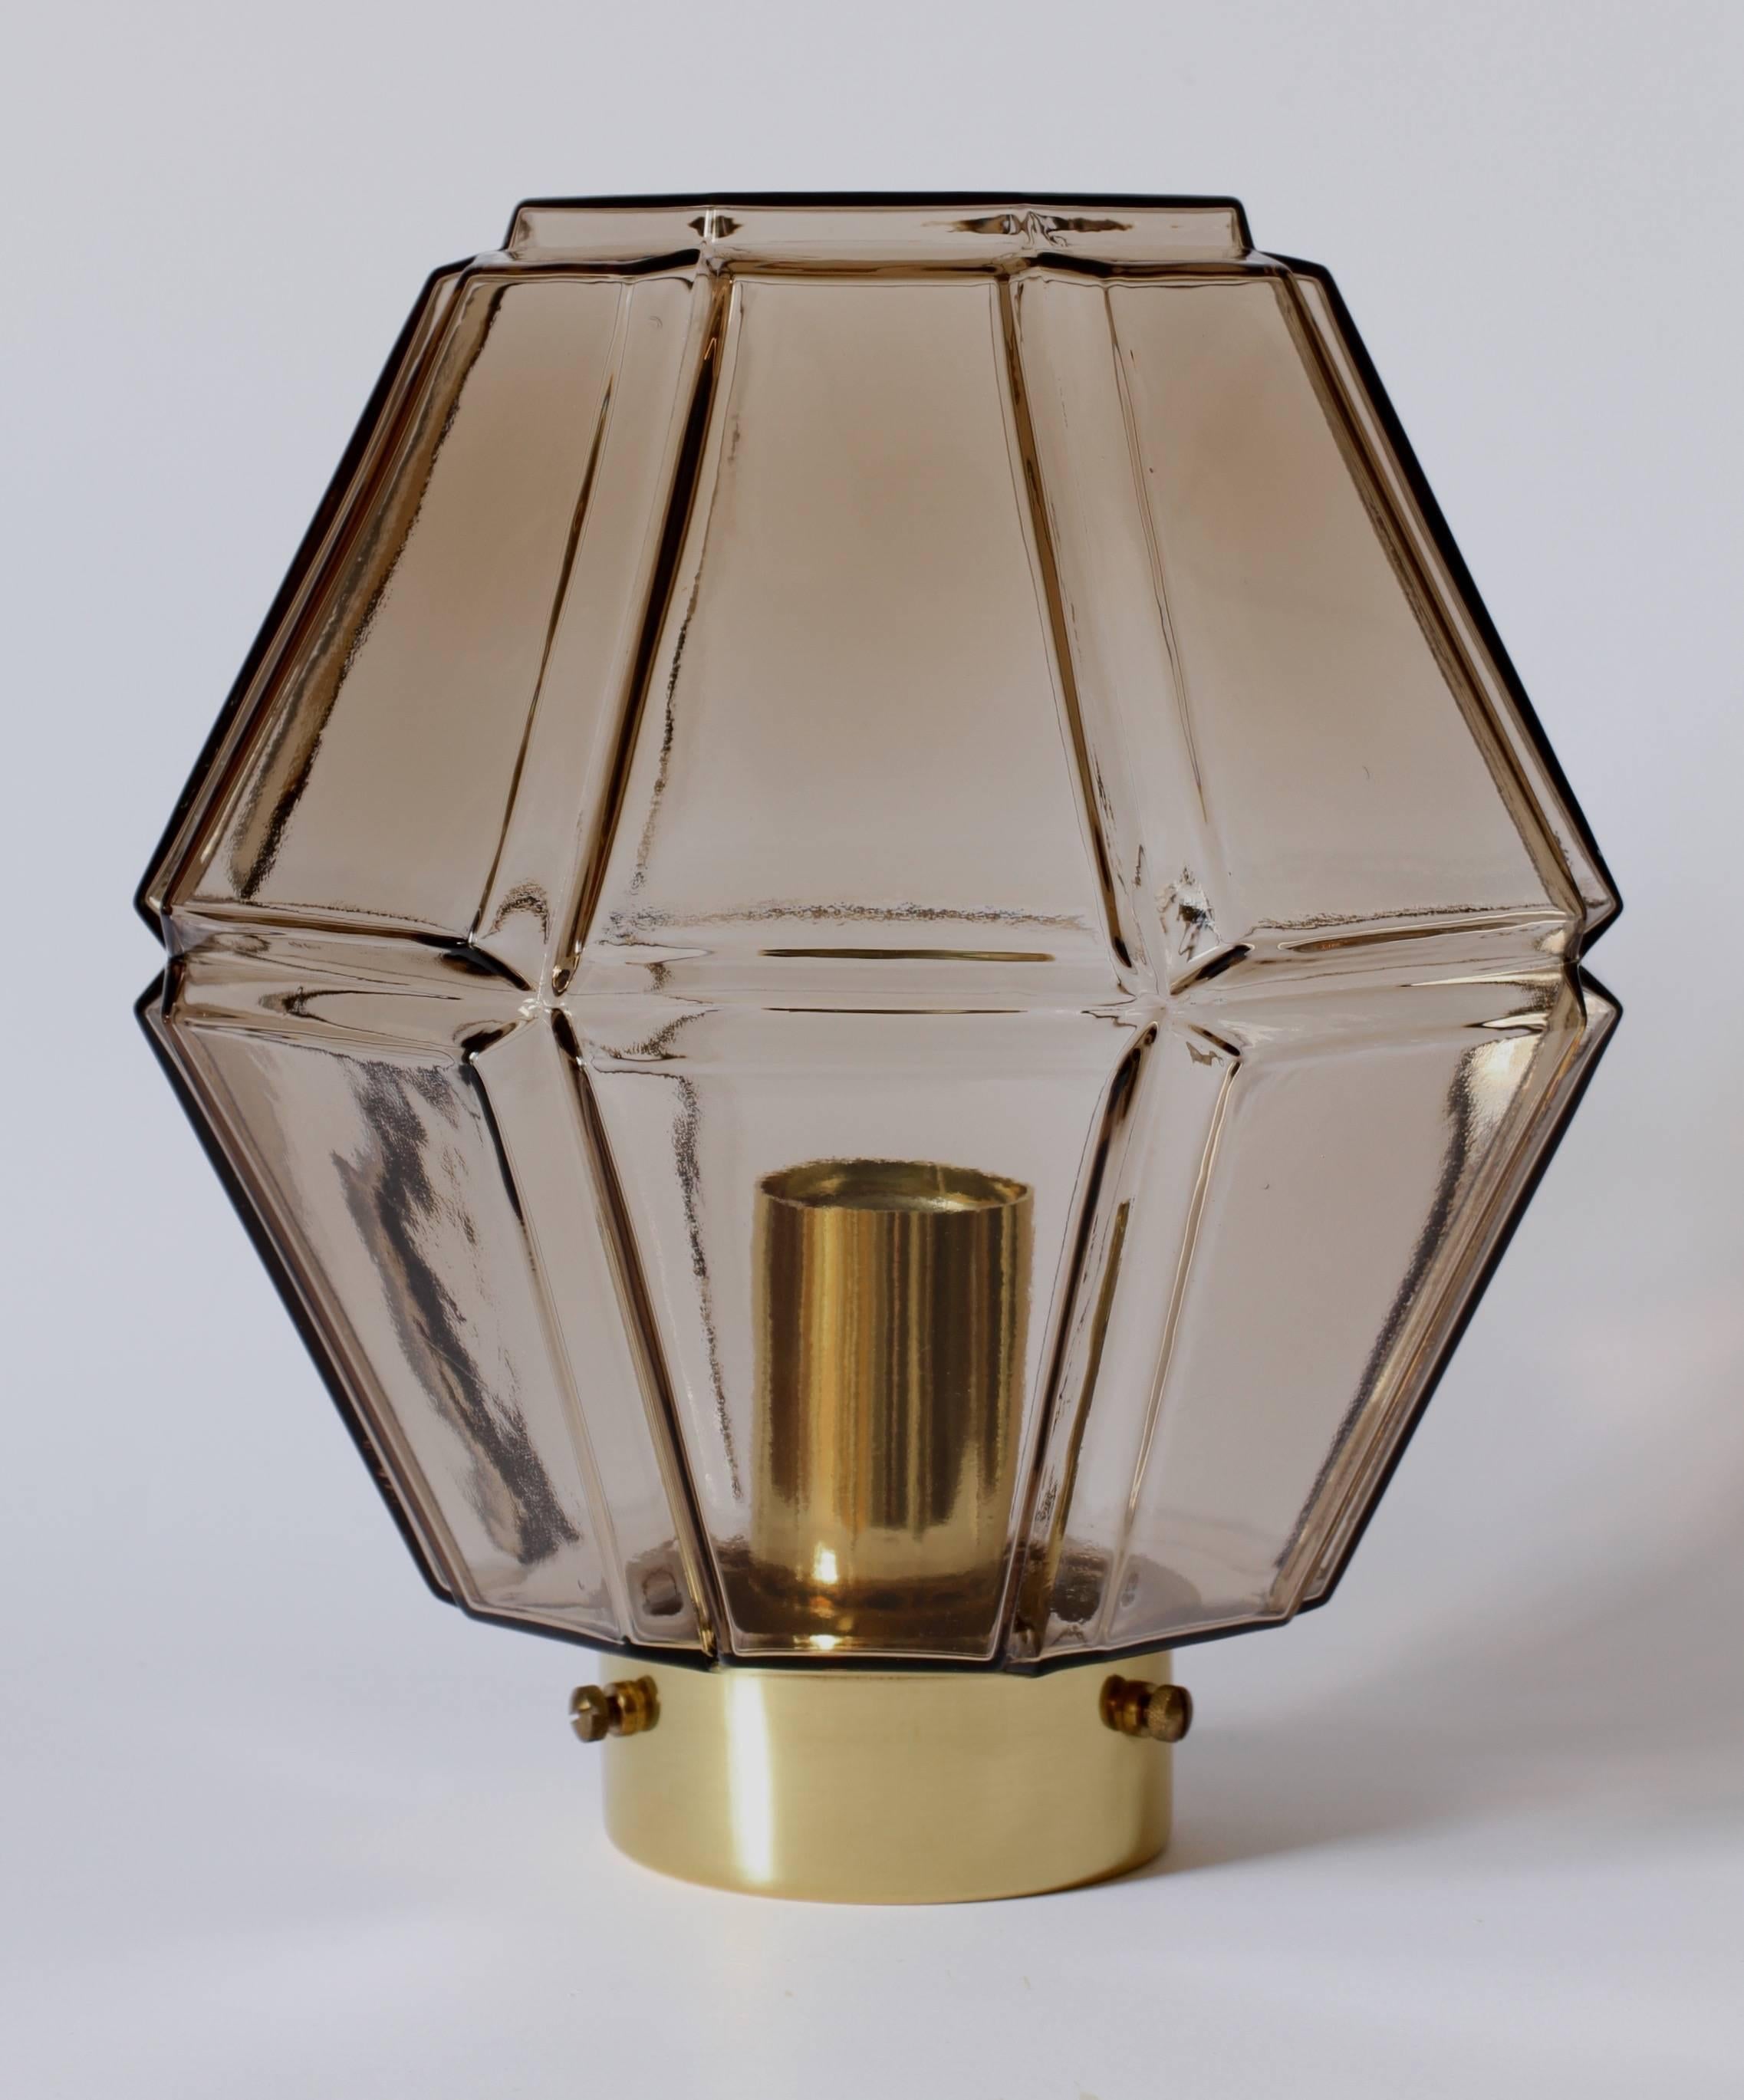 One of a pair of wonderful German light fixtures by Glashütte Limburg, circa 1965-1975. The geometric octagonal form illuminates beautifully and suggests something almost more Art Deco in style and design although it is firmly a Mid-Century